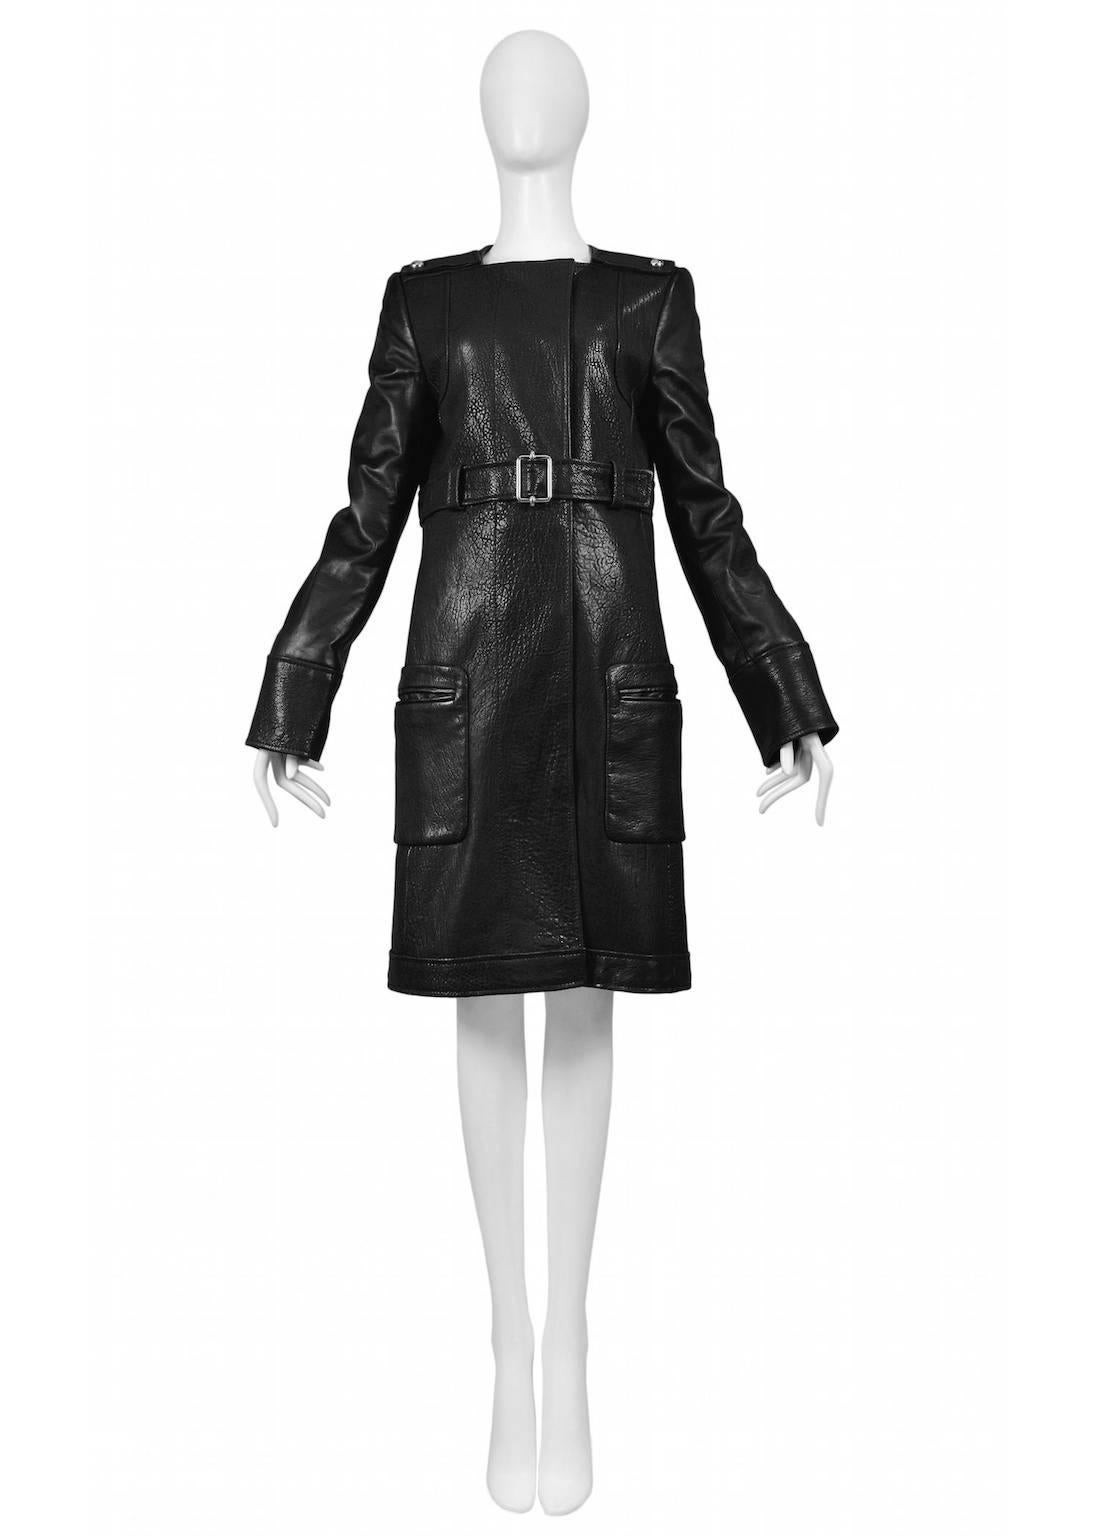 Vintage Nicolas Ghesquière for Balenciaga black leather mid length coat featuring a high waisted buckled belt and two pockets at either hip. A runway piece from the Autumn / Winter 2005 Collection.